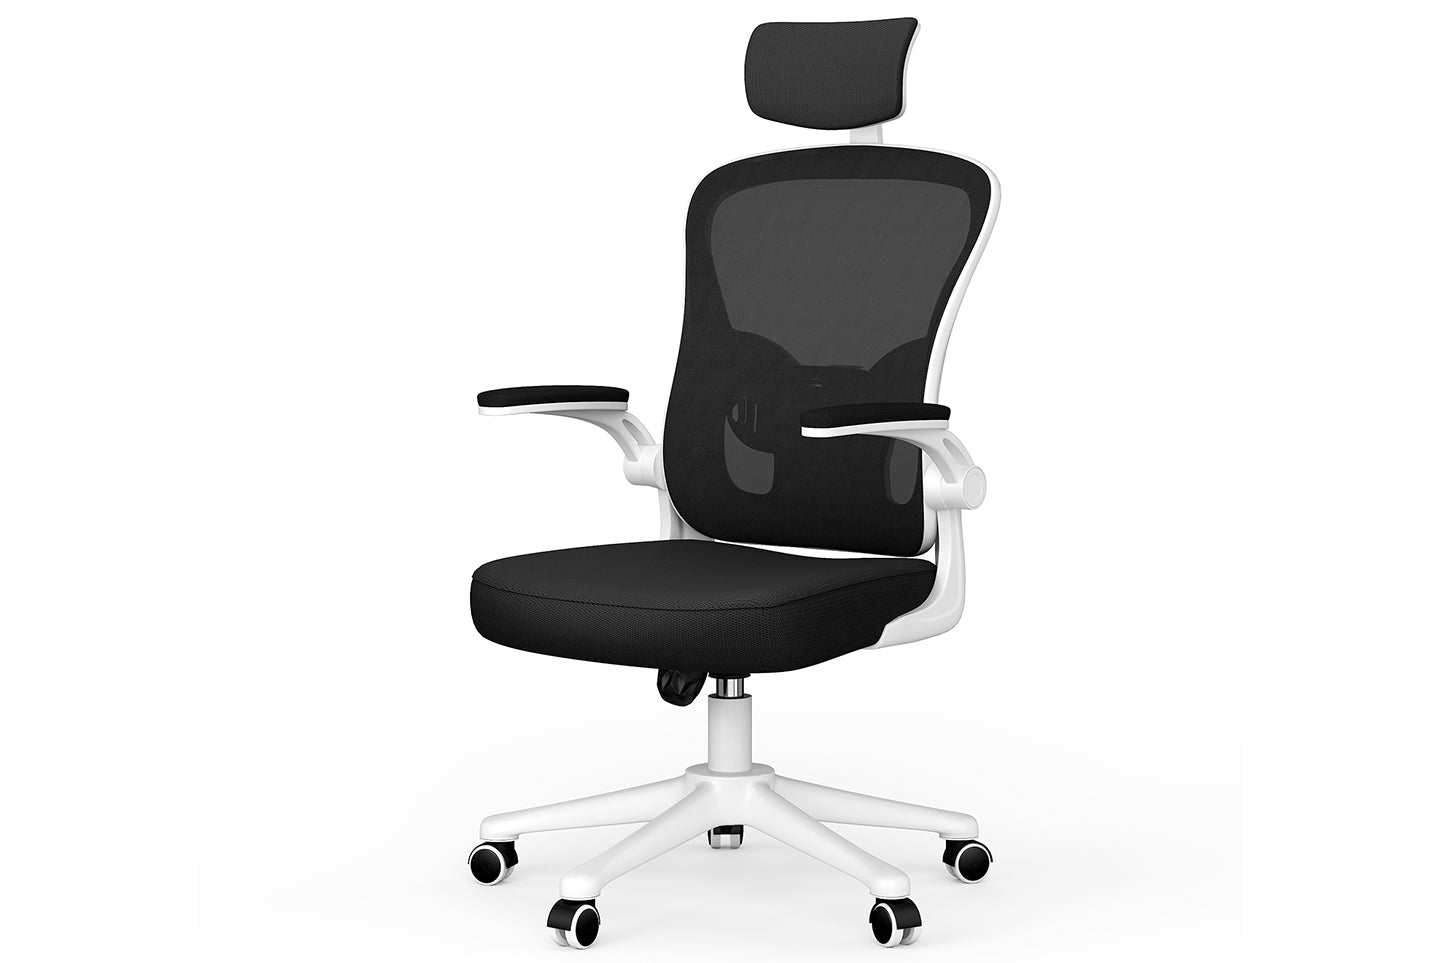 Office Chair Ergonomic Desk Chair Swivel Computer Chair for Home Office Max Load 150kg, With Headrest / White